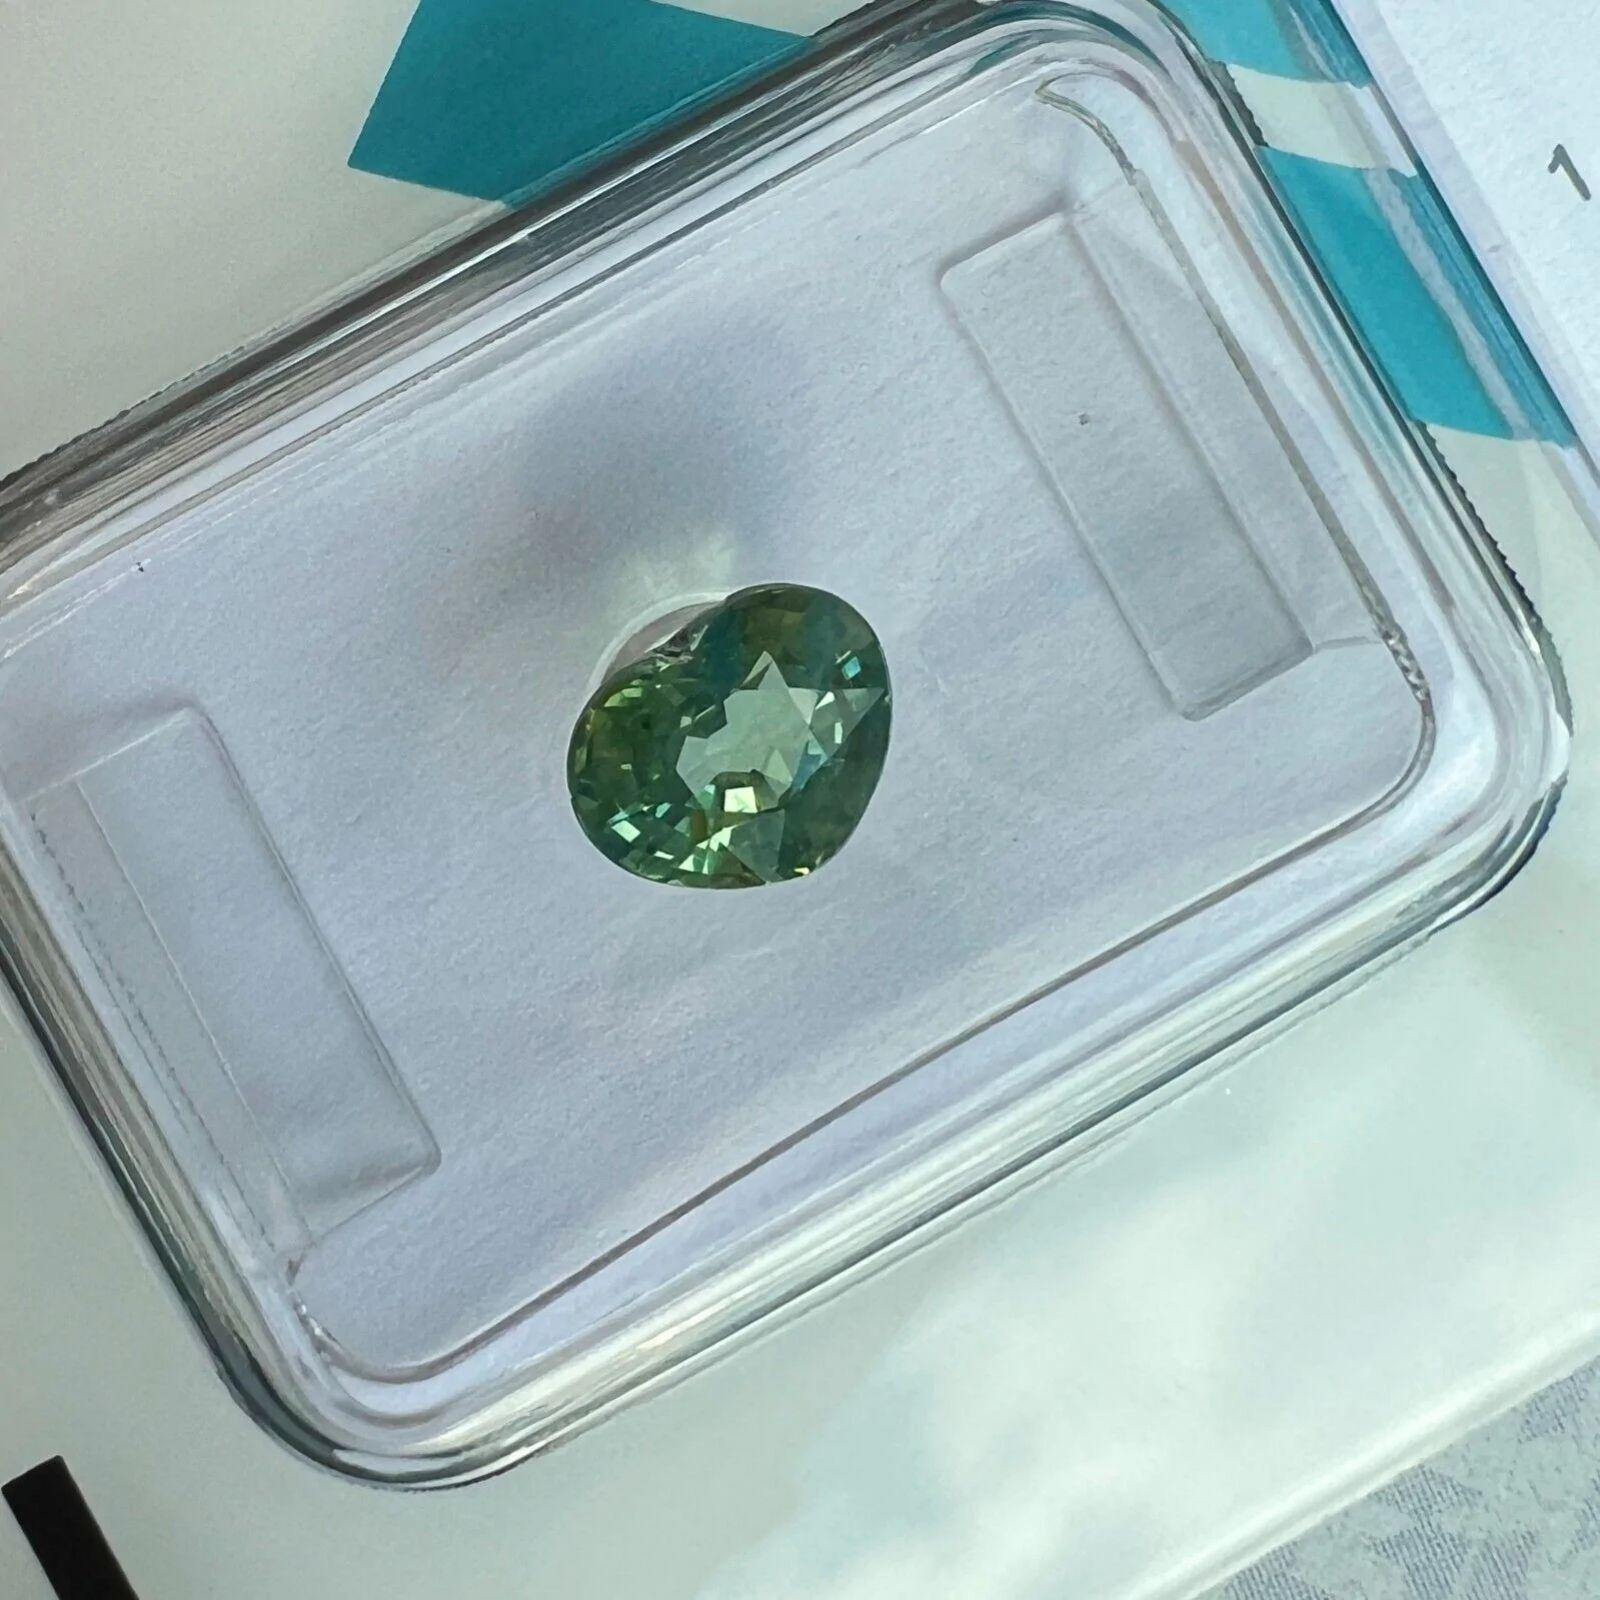 1.07ct Vivid Green Untreated IGI Certified Australian Sapphire Heart Cut Blister

Fine Vivid 'Blueish Yellowish Green' Untreated Heart Cut Sapphire In IGI Blister.
1.07 Carat with an excellent heart cut and totally untreated/unheated which is very